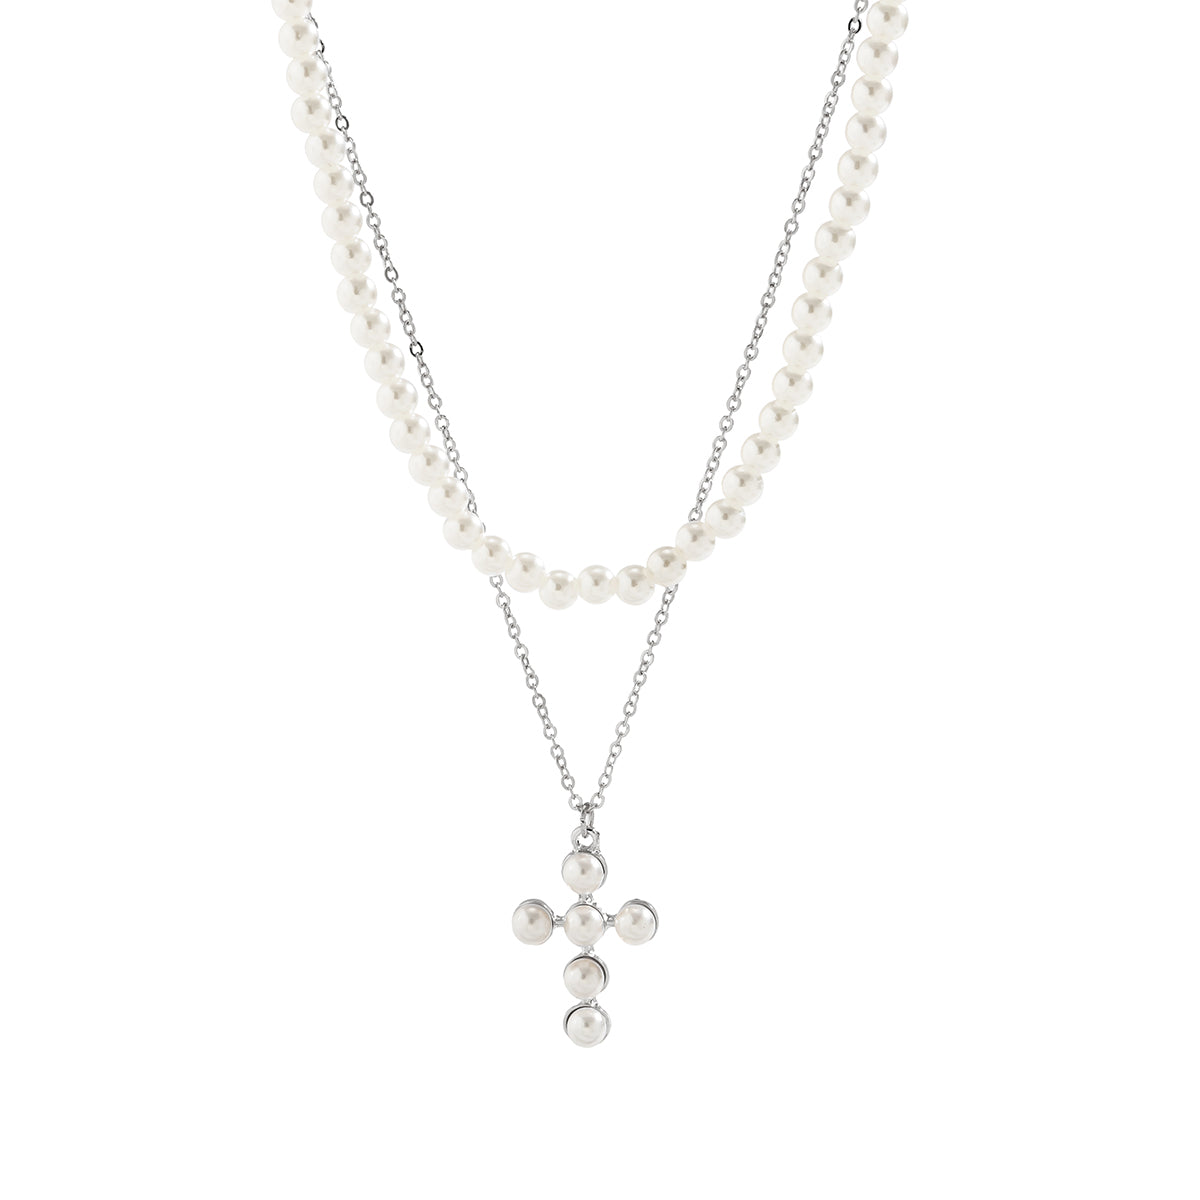 Pearl & Silver-Plated Cross Pendant Layered Necklace